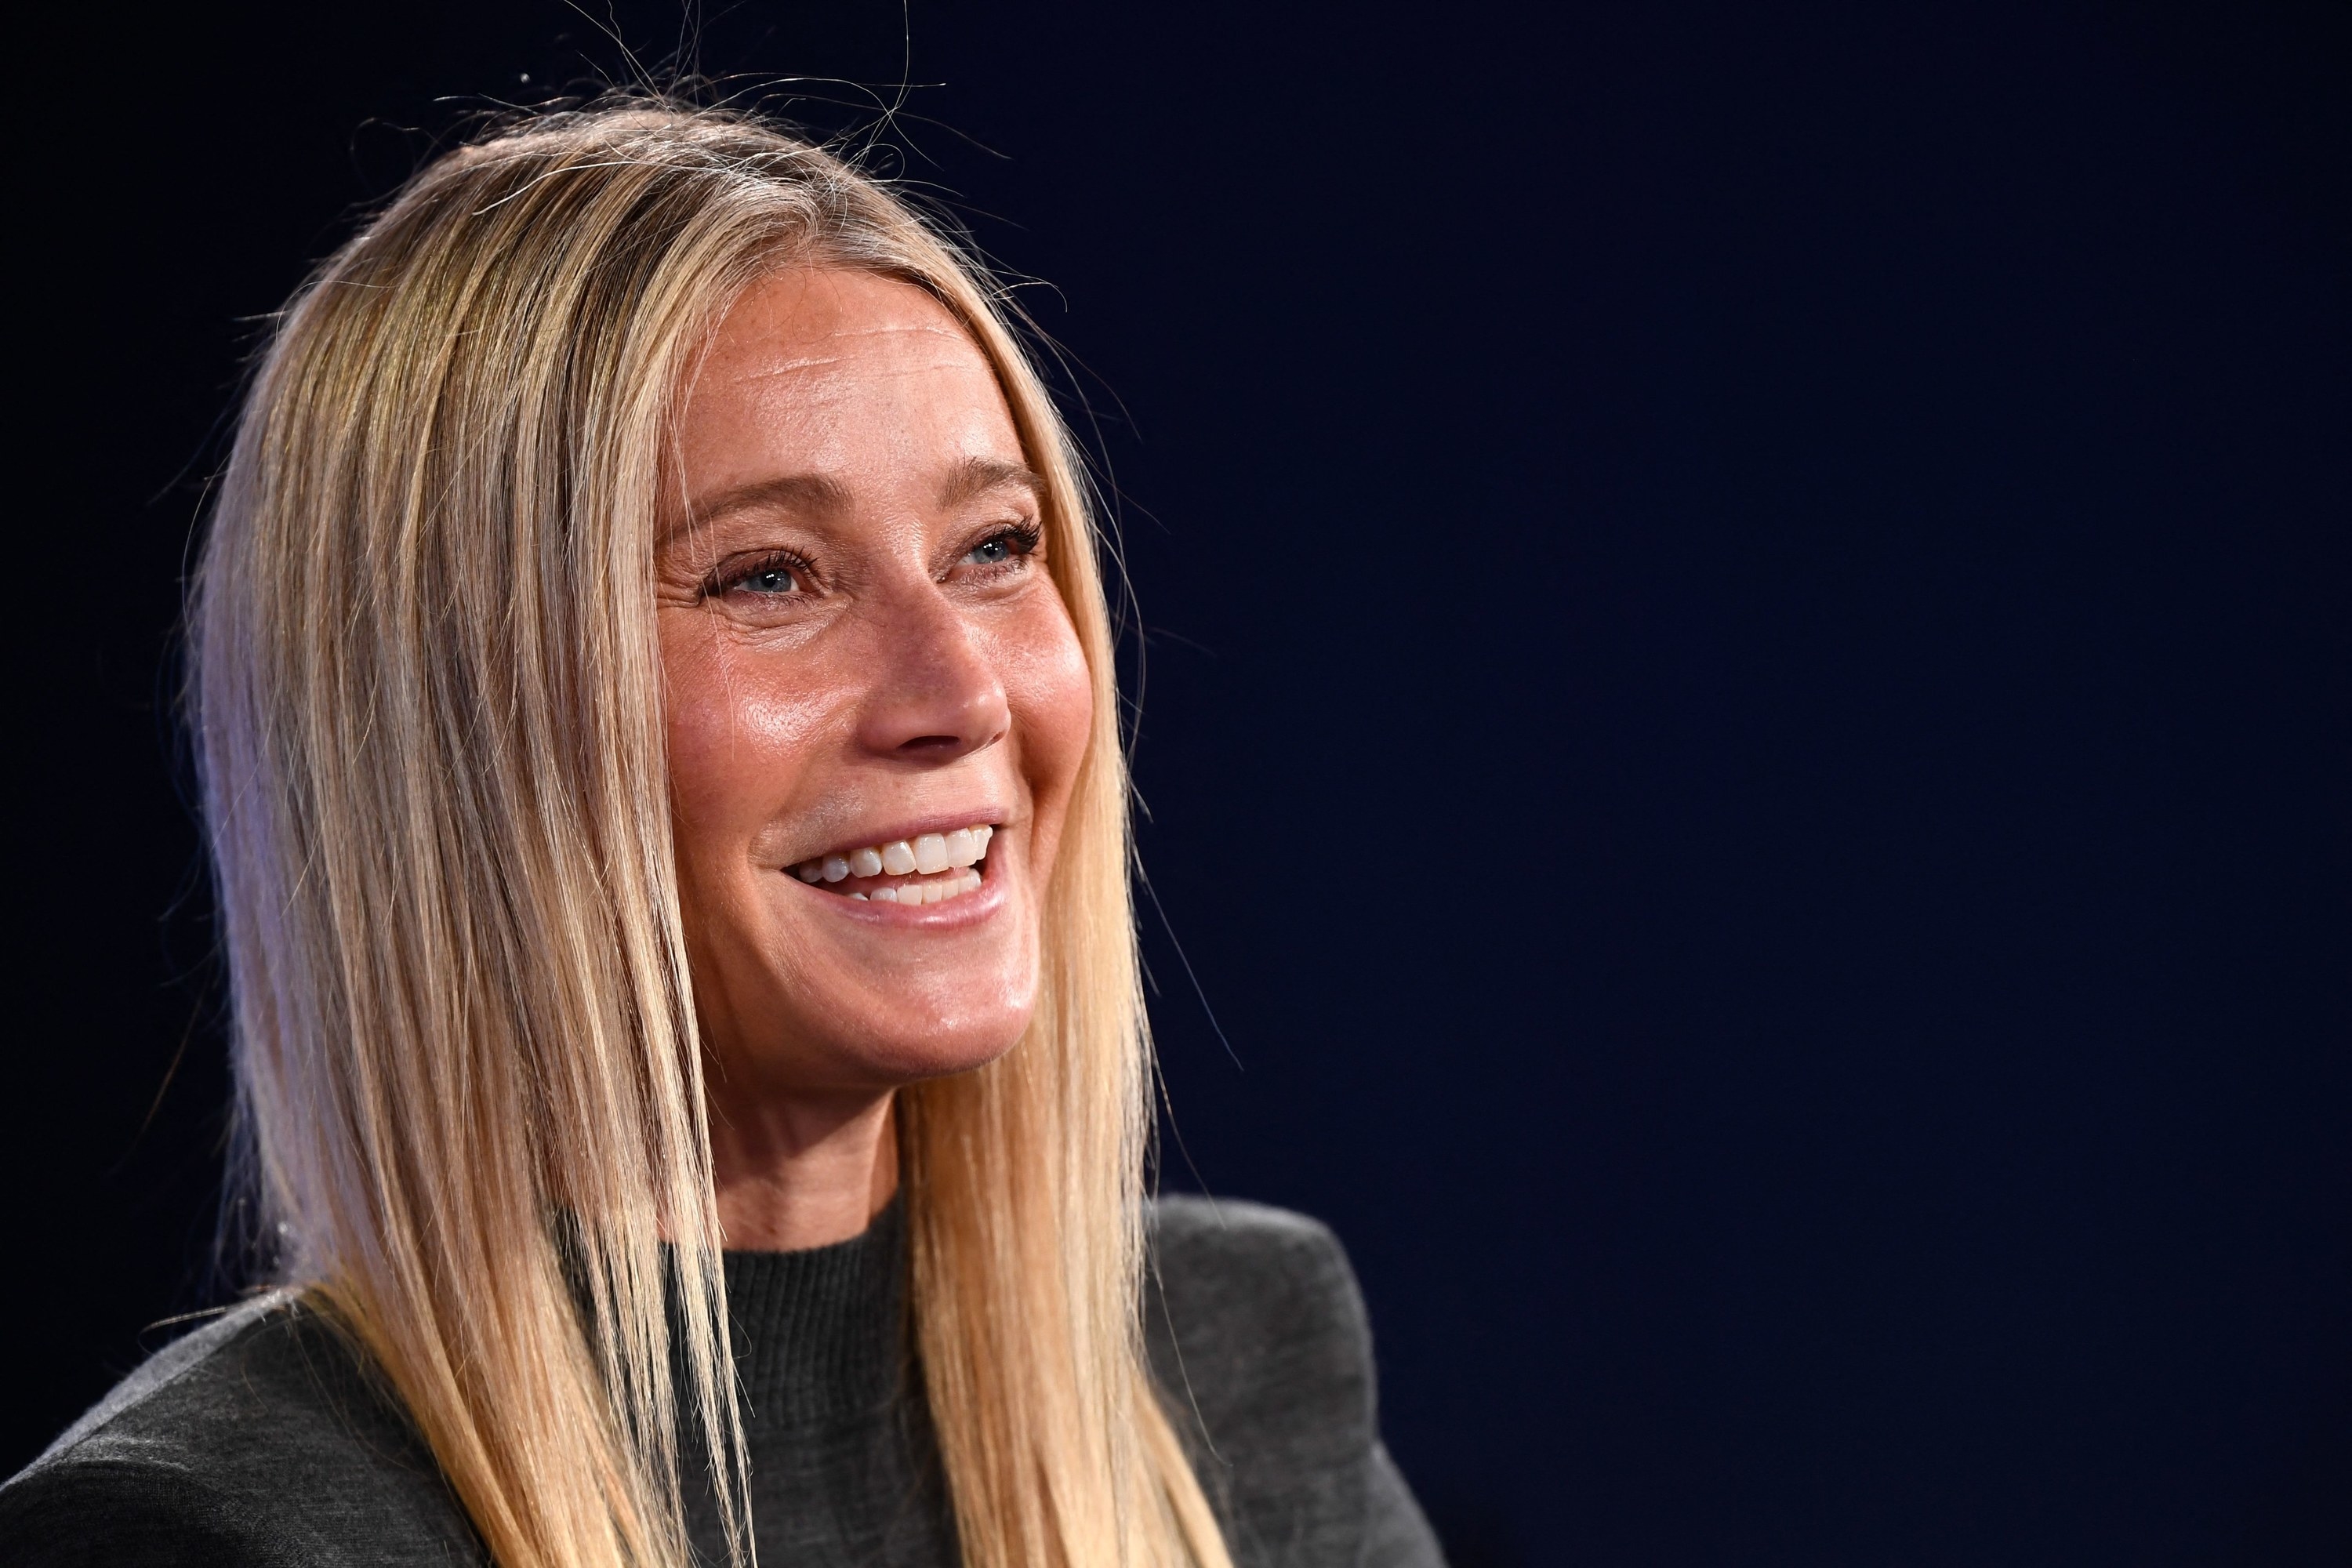 Gwyneth Paltrow, US actress and founder and CEO of Goop, speaks during the Milken Institute Global Conference in Beverly Hills, California